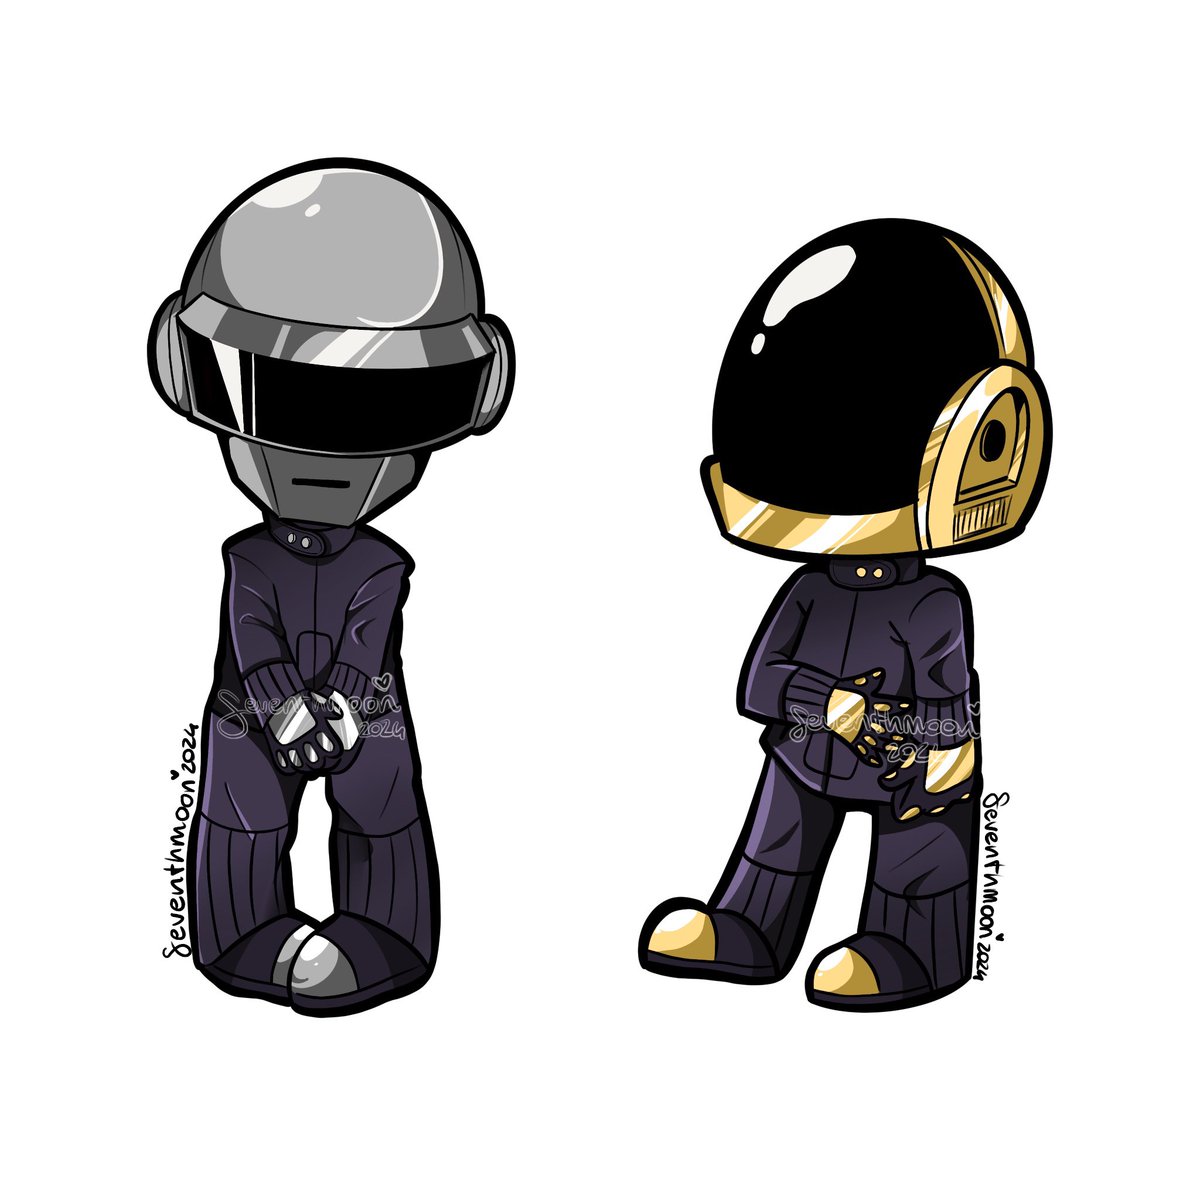 Are they human after all or pookies after all?
Should I draw them as humans as they are in 2024 as well?
Btw, I’m having a moment bc I’m so thankful for all the support I’ve been receiving here on X, it makes my heart happy. 
Commissions are open btw! #daftpunk #humanafterall